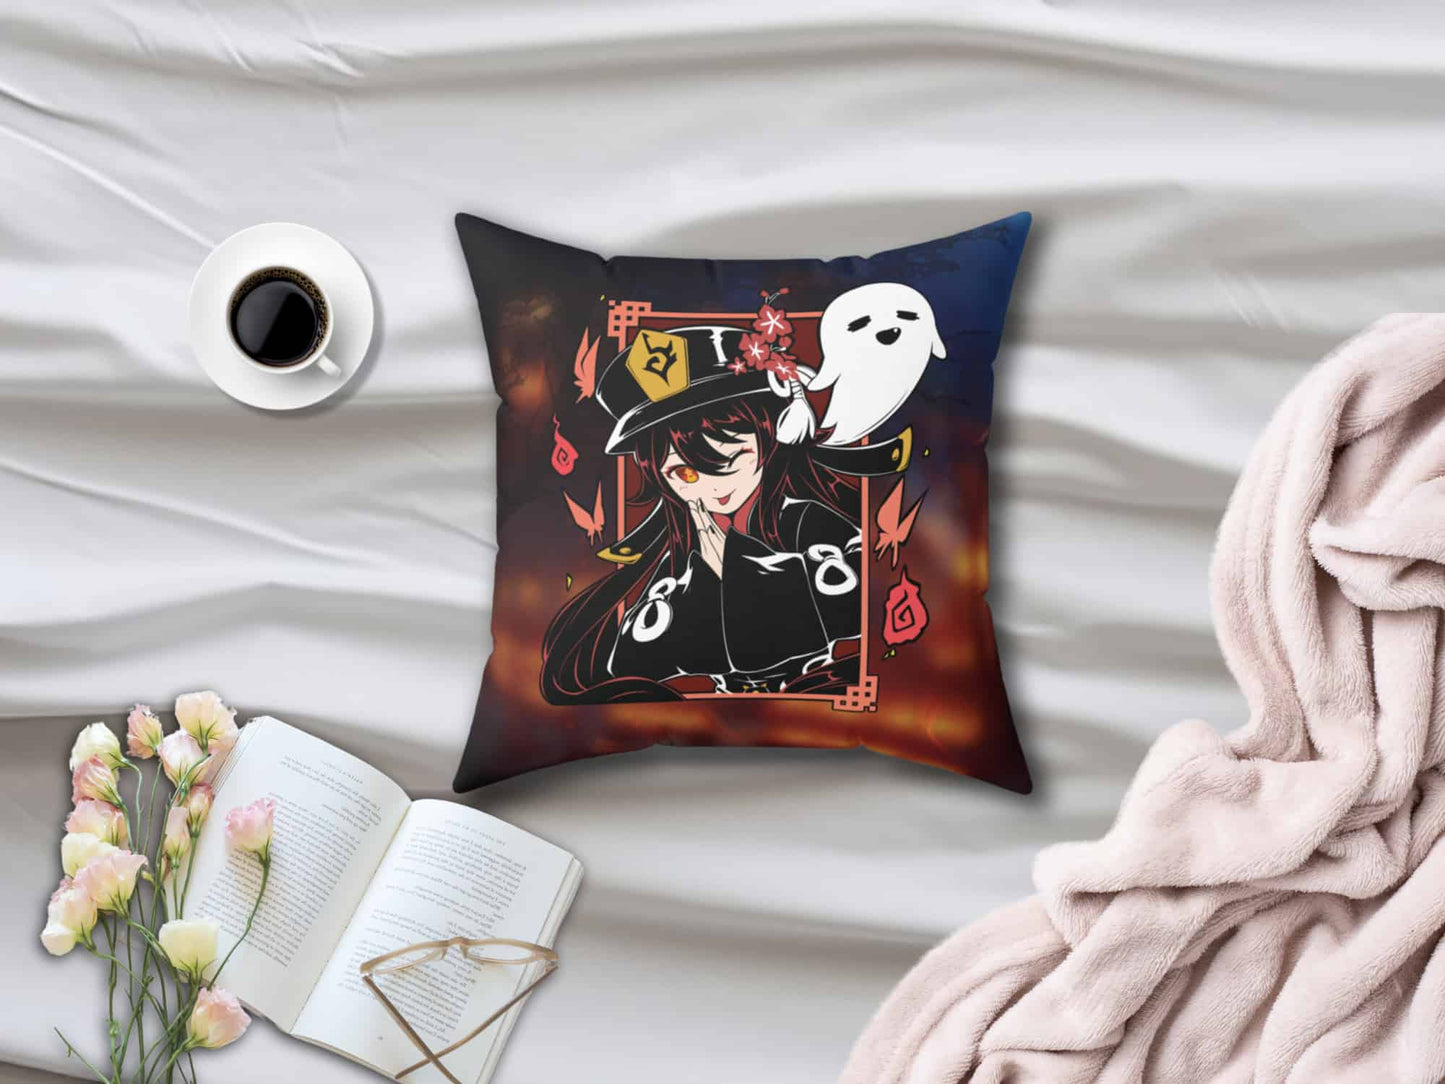 Hu Tao Square Pillow (Limited Edition Fan Made) -